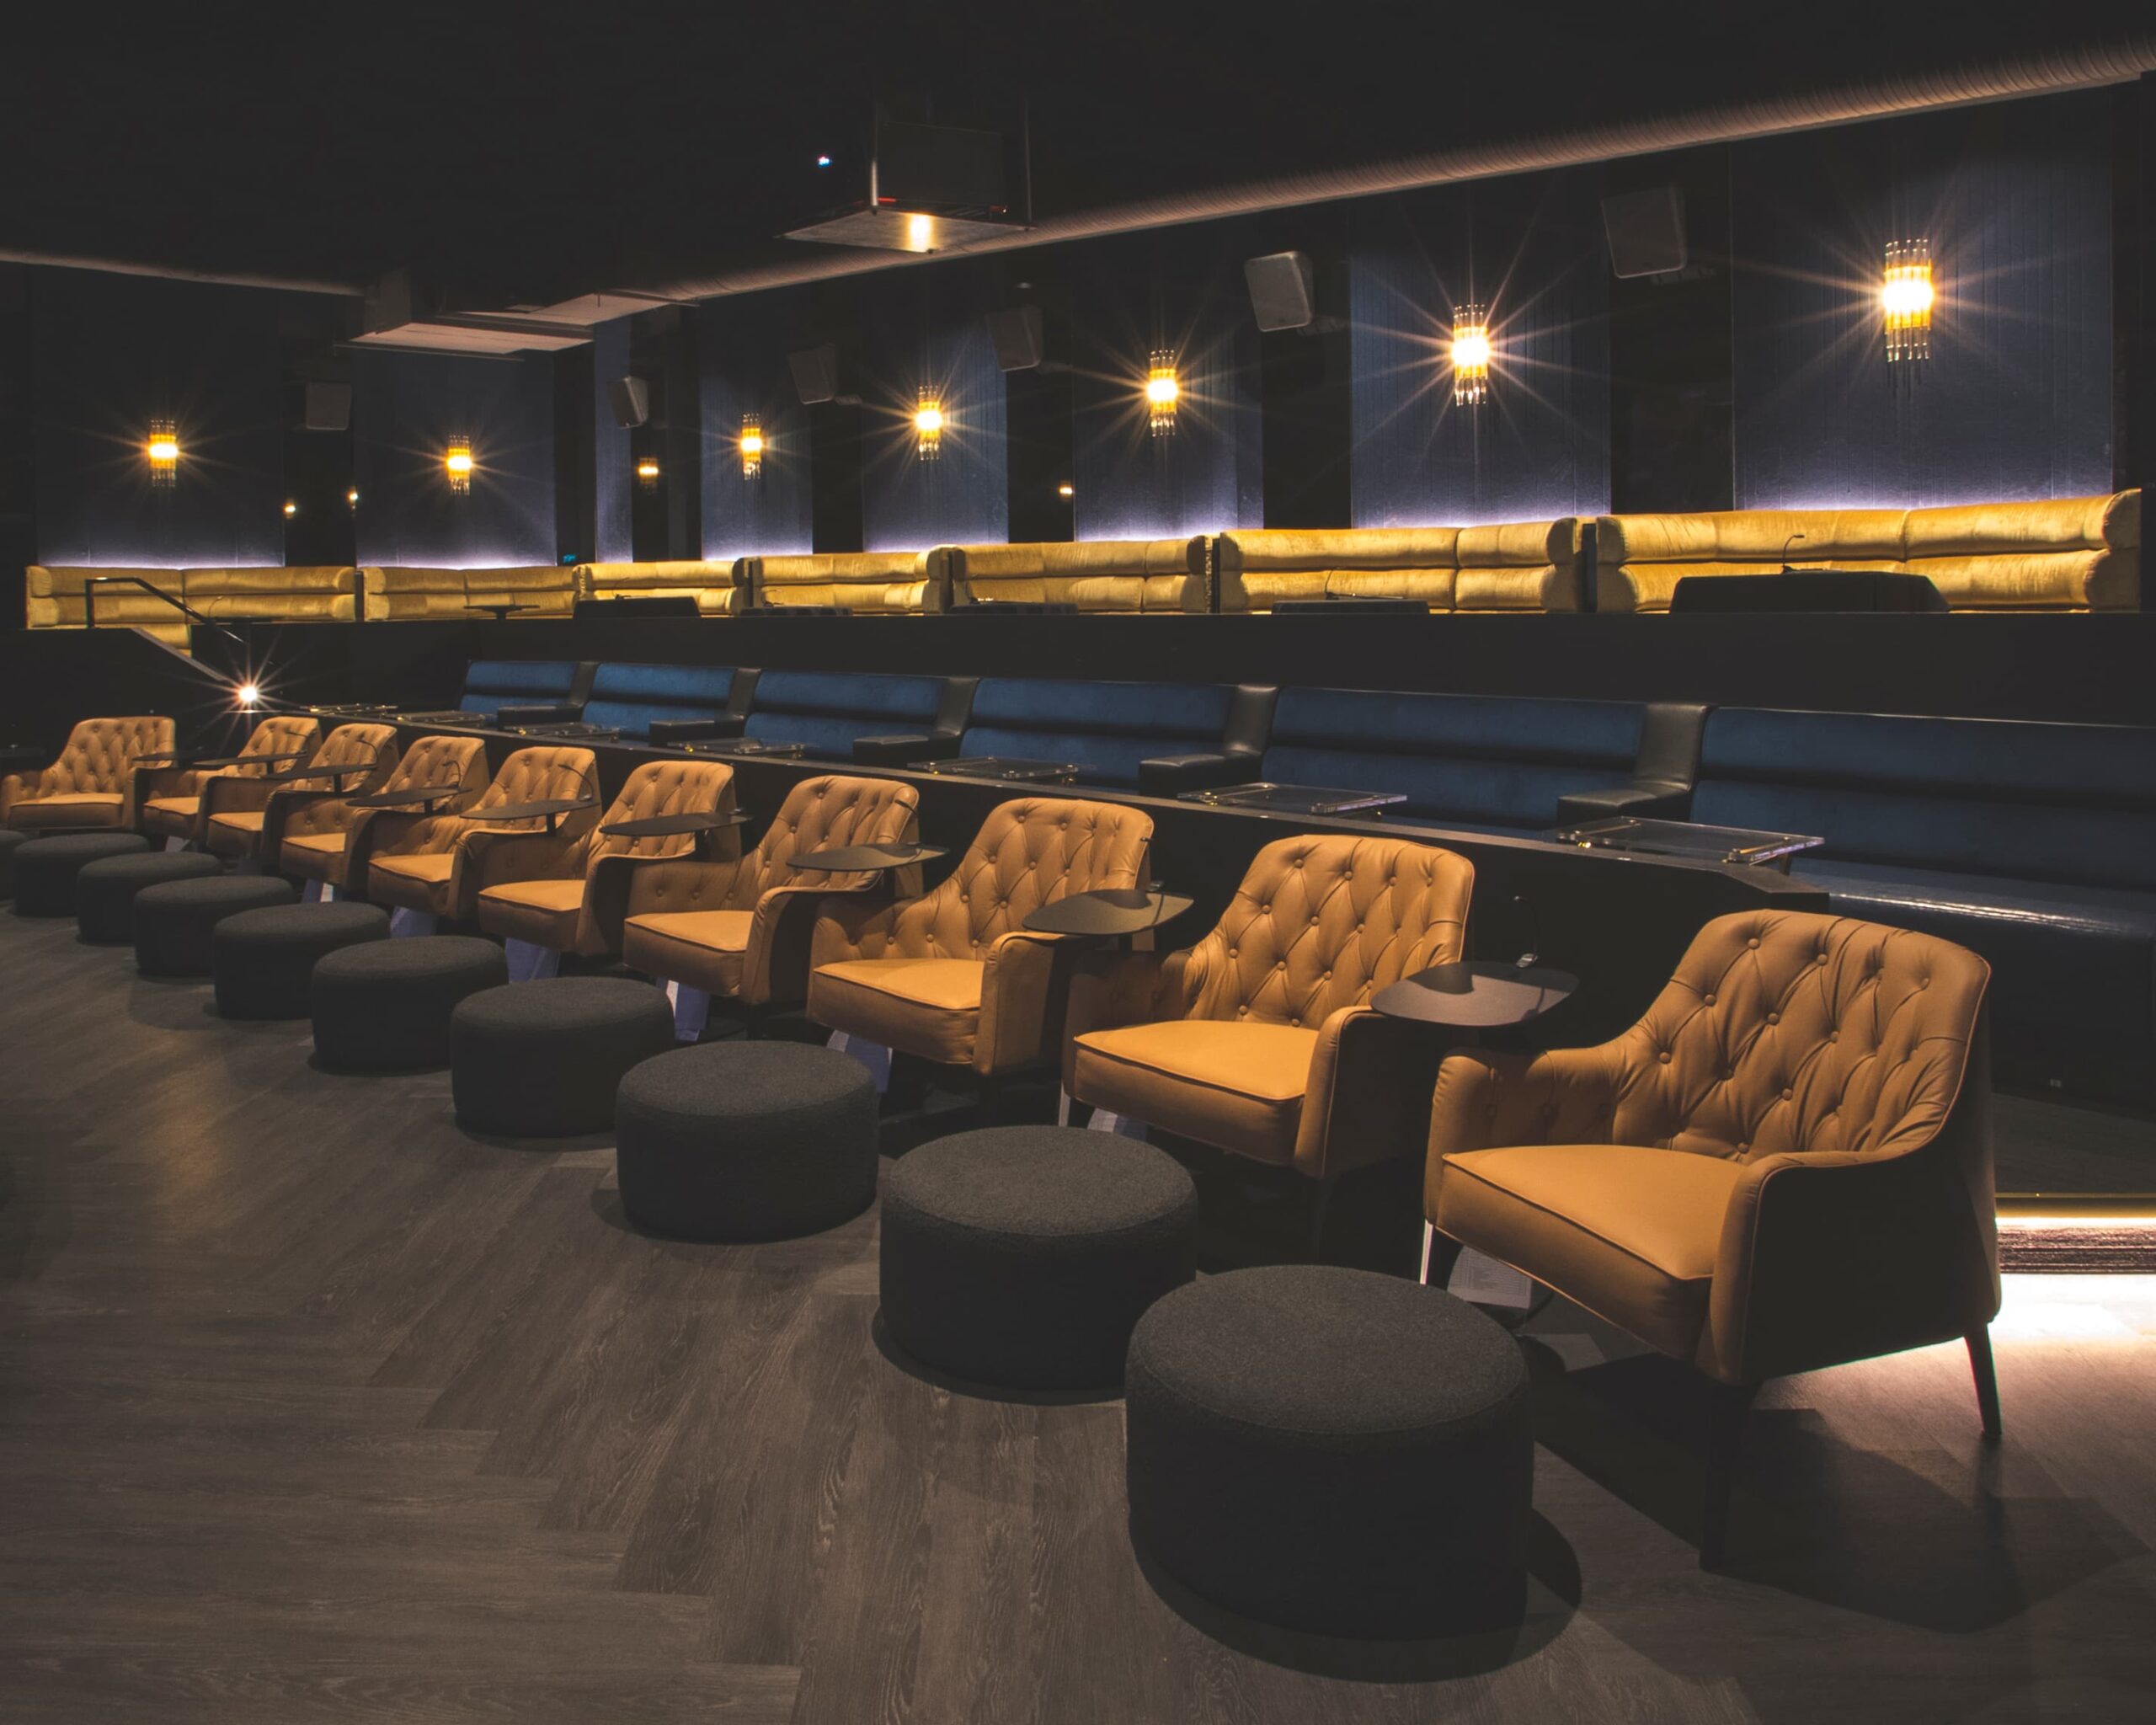 Cinema room with gold chairs in the front row and booths at the back